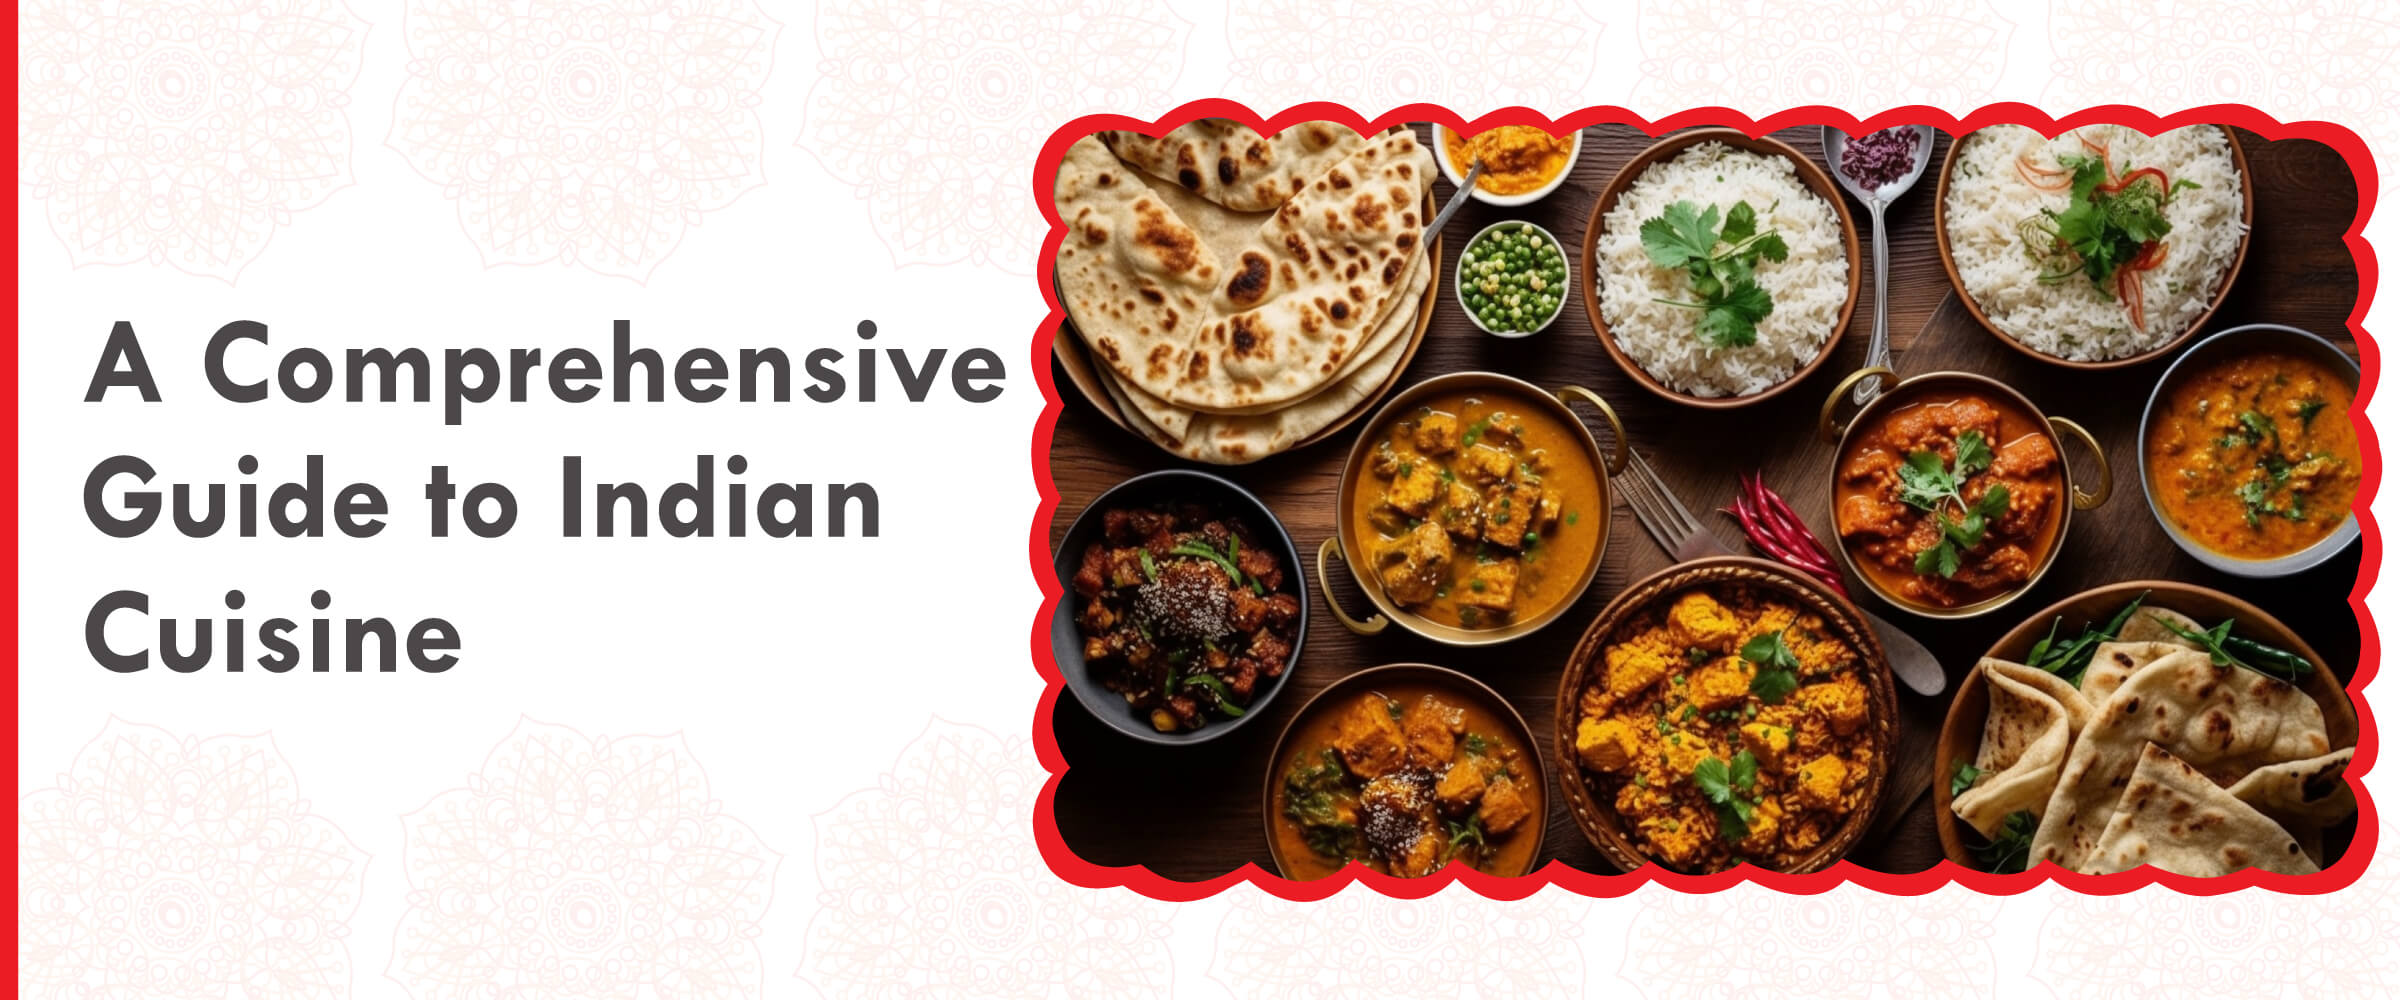 A Comprehensive Guide to Indian Cuisine